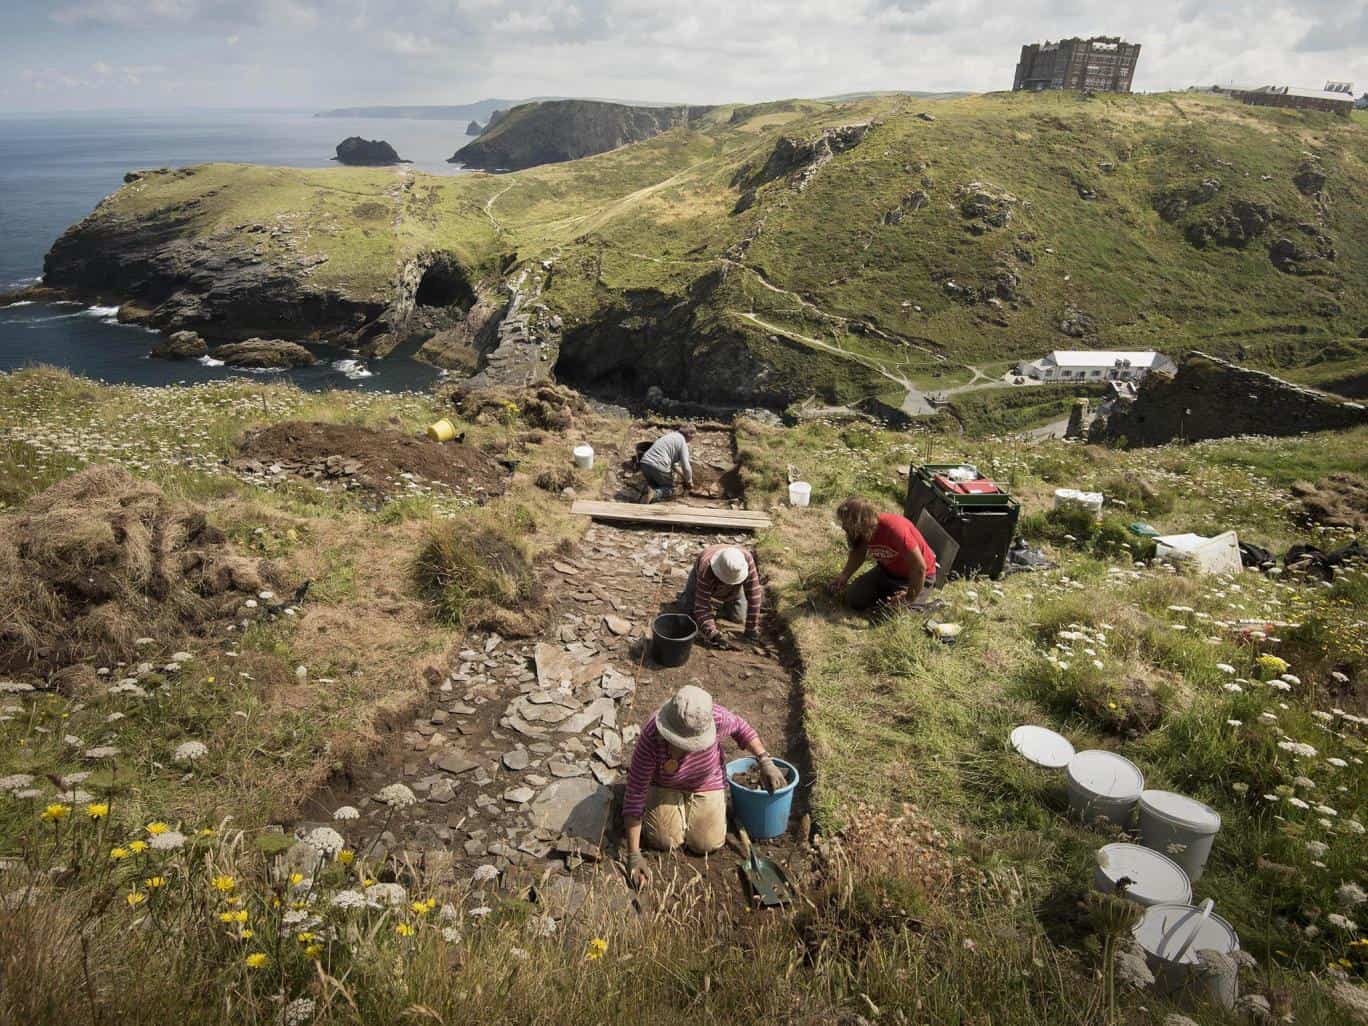 The excavation set out to find more about Tintagel's past which is believed to date back to the 5th and 6th centuries Emily Whitfield-Wicks 